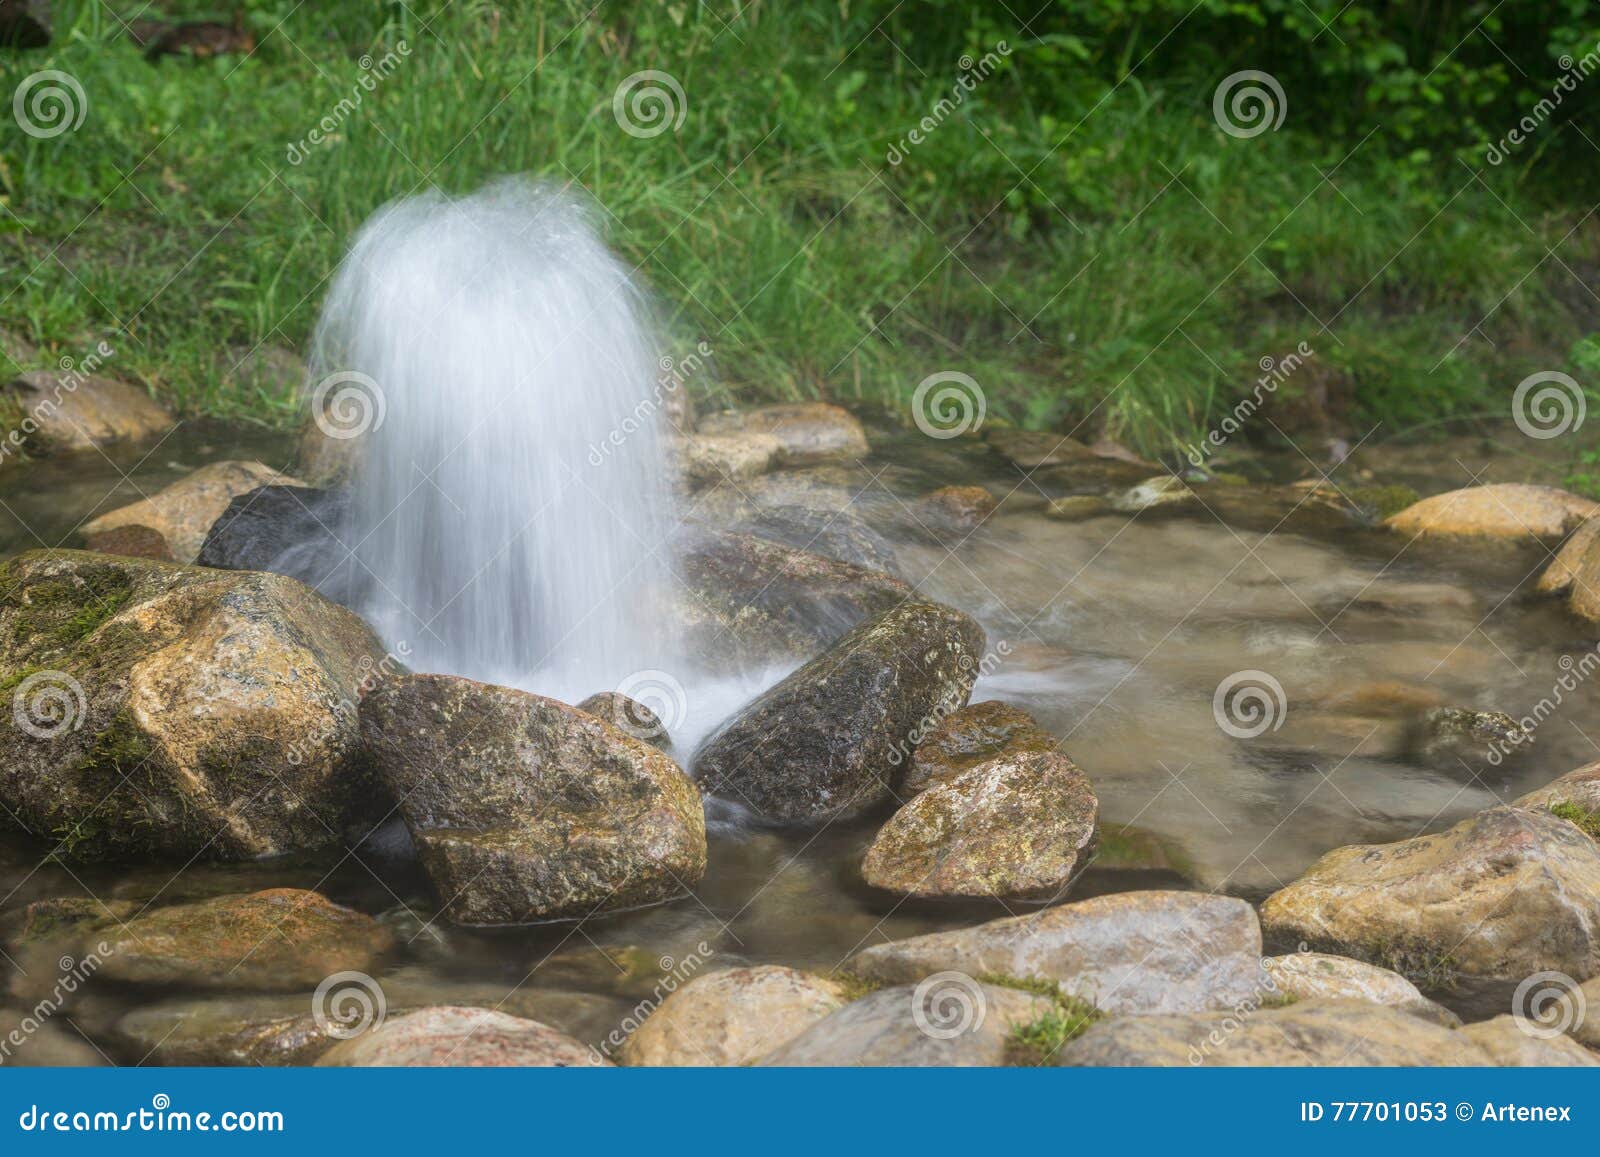 artesian well. eruption of spring, natural environment. stones and water. clean drinking groundwater erupting out of the ground.